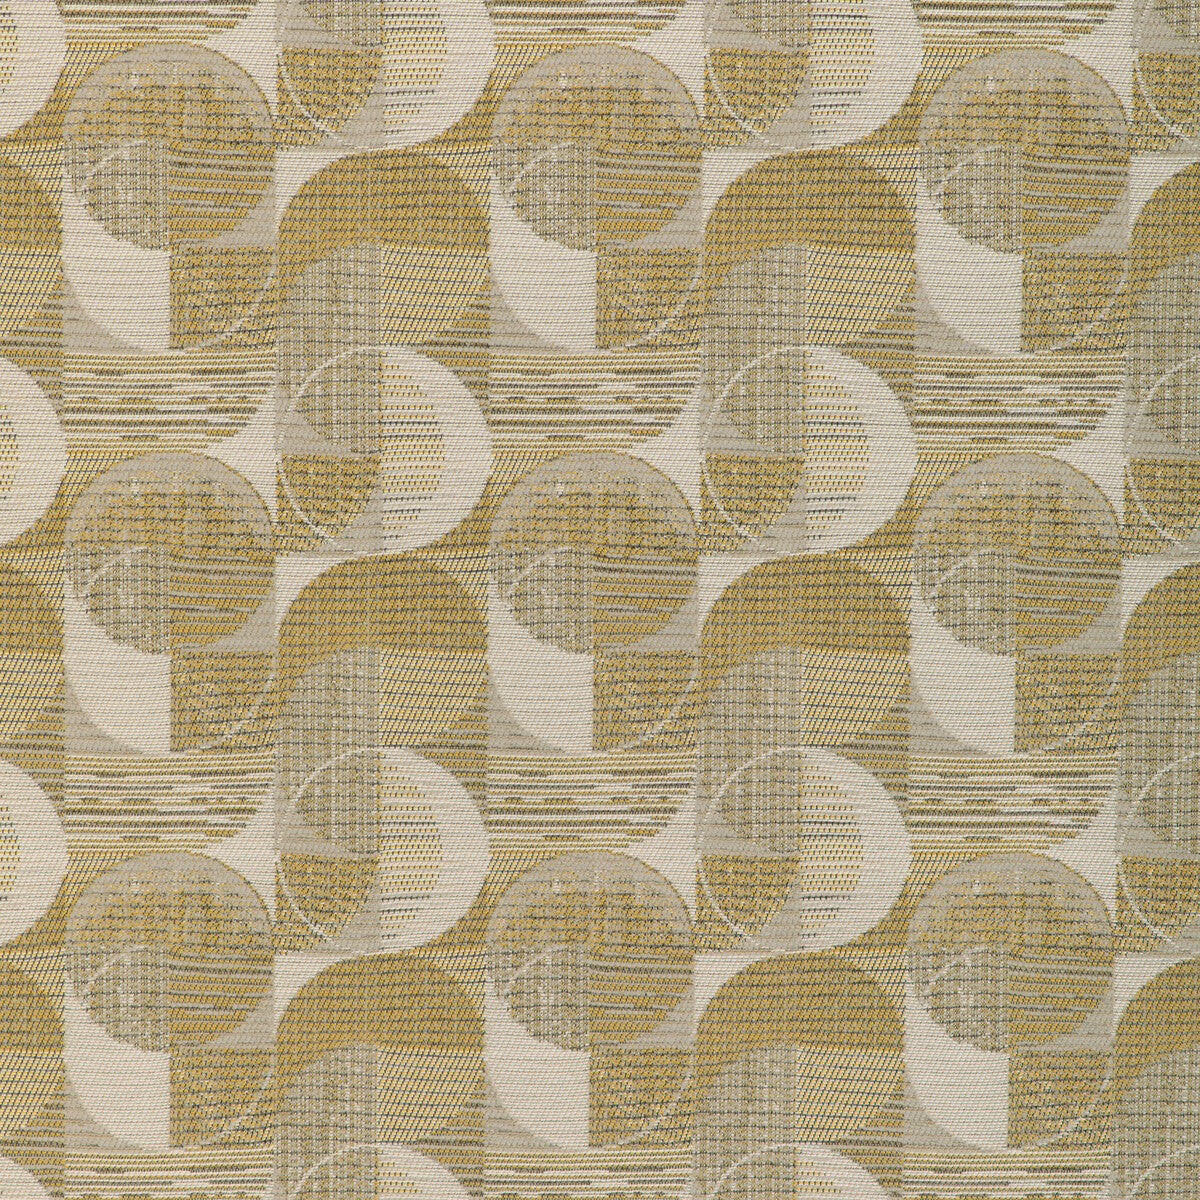 Daybreak fabric in lemongrass color - pattern 37050.40.0 - by Kravet Contract in the Chesapeake collection